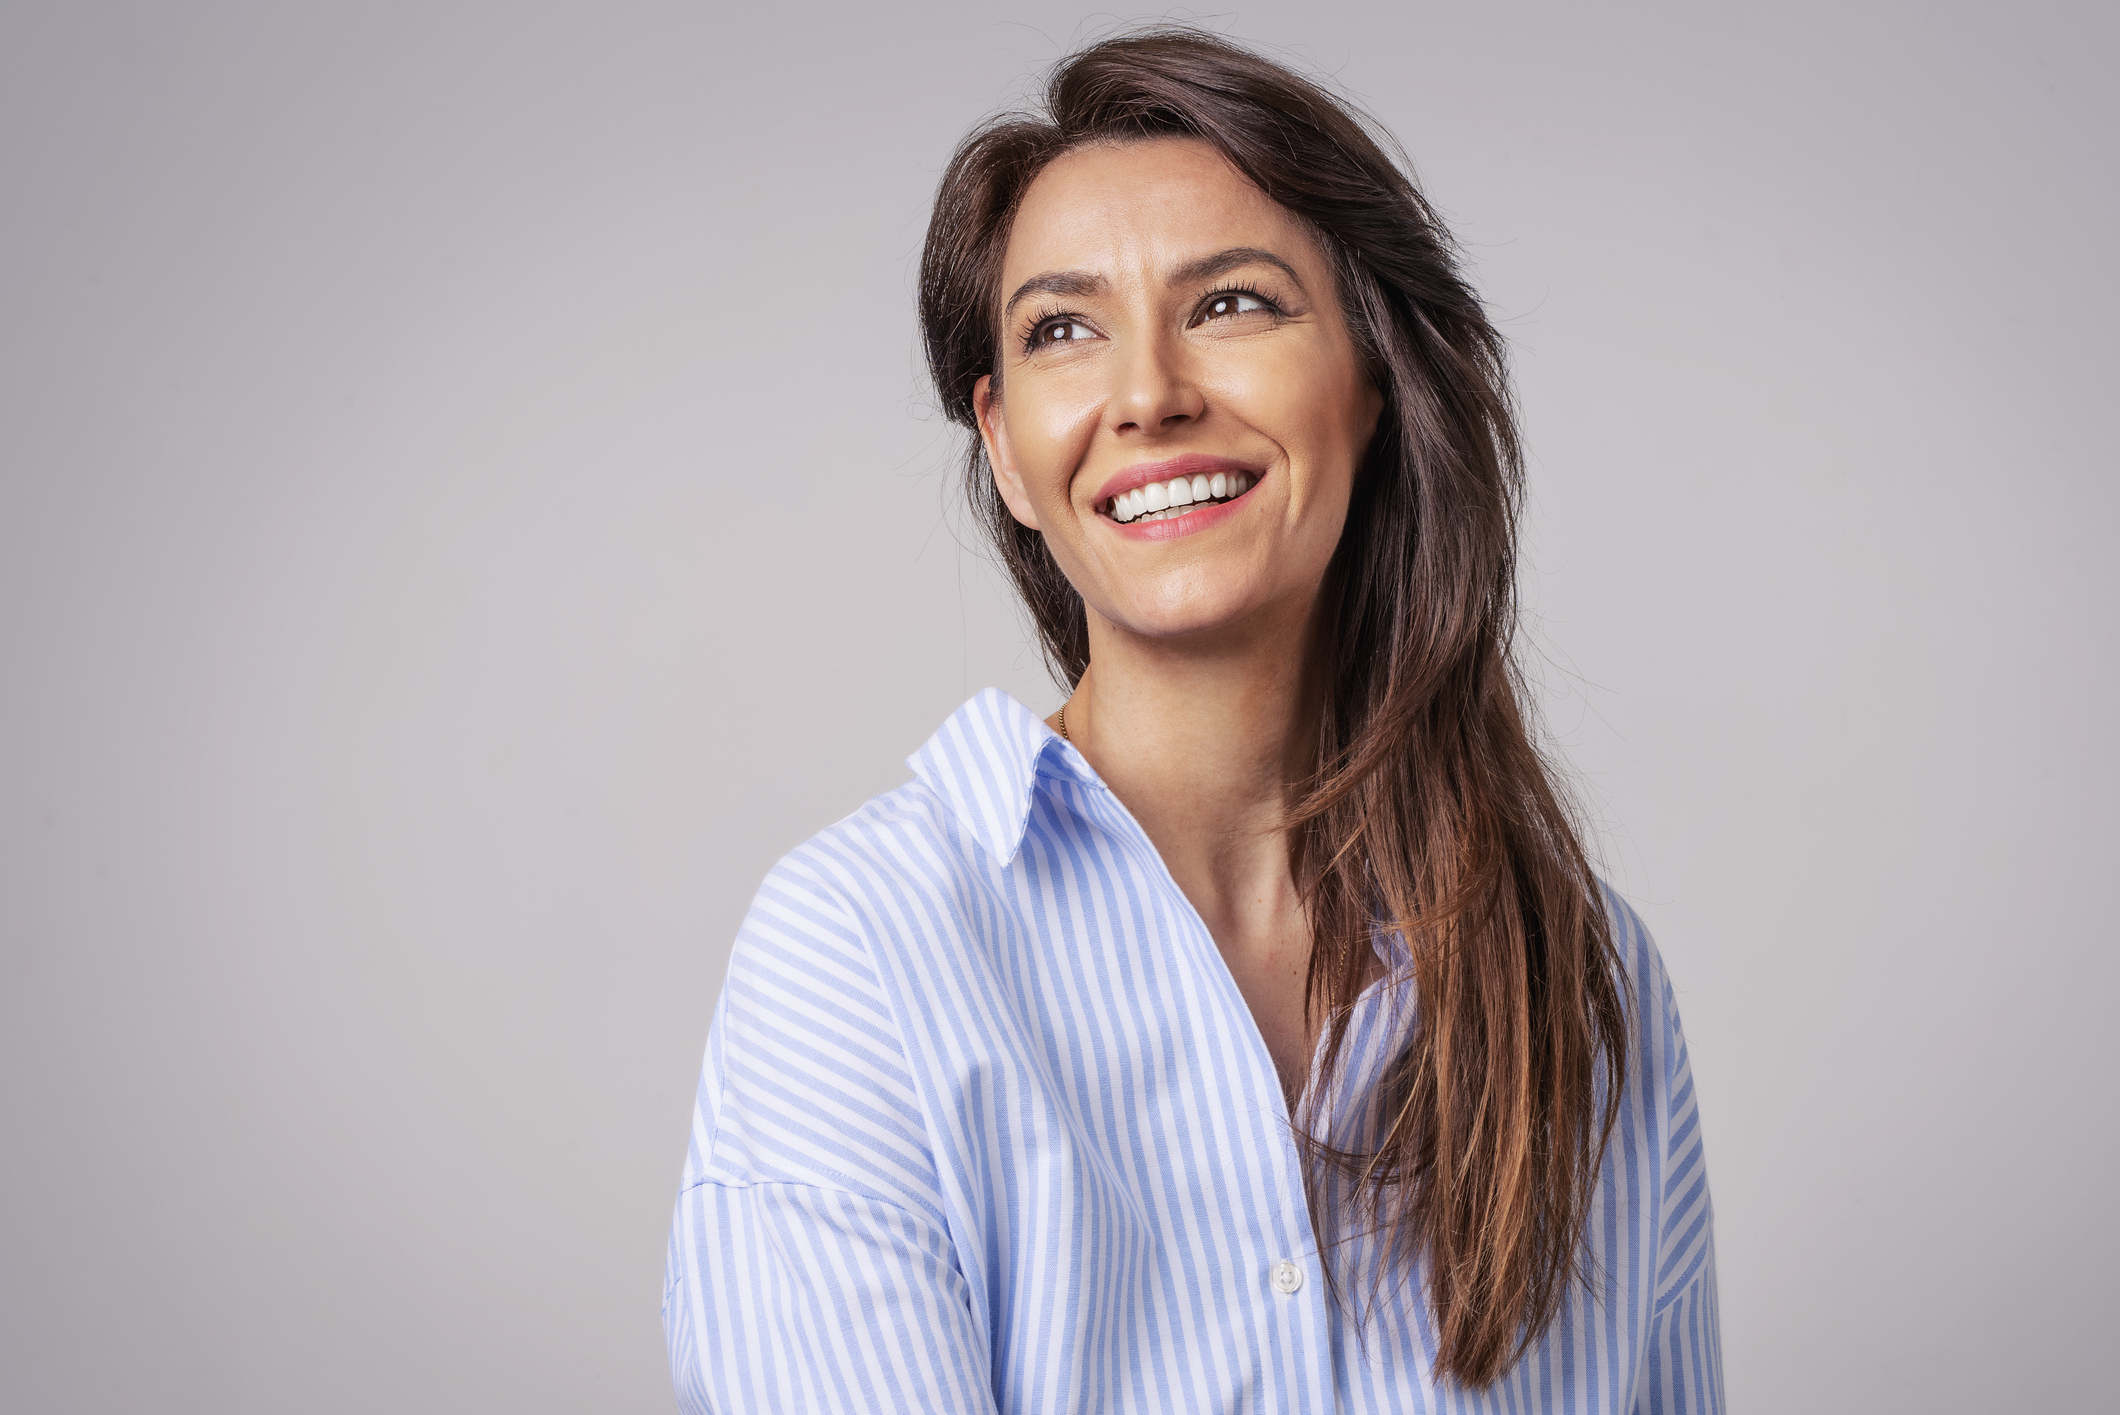 Brown haired woman smiling in a blue striped blouse